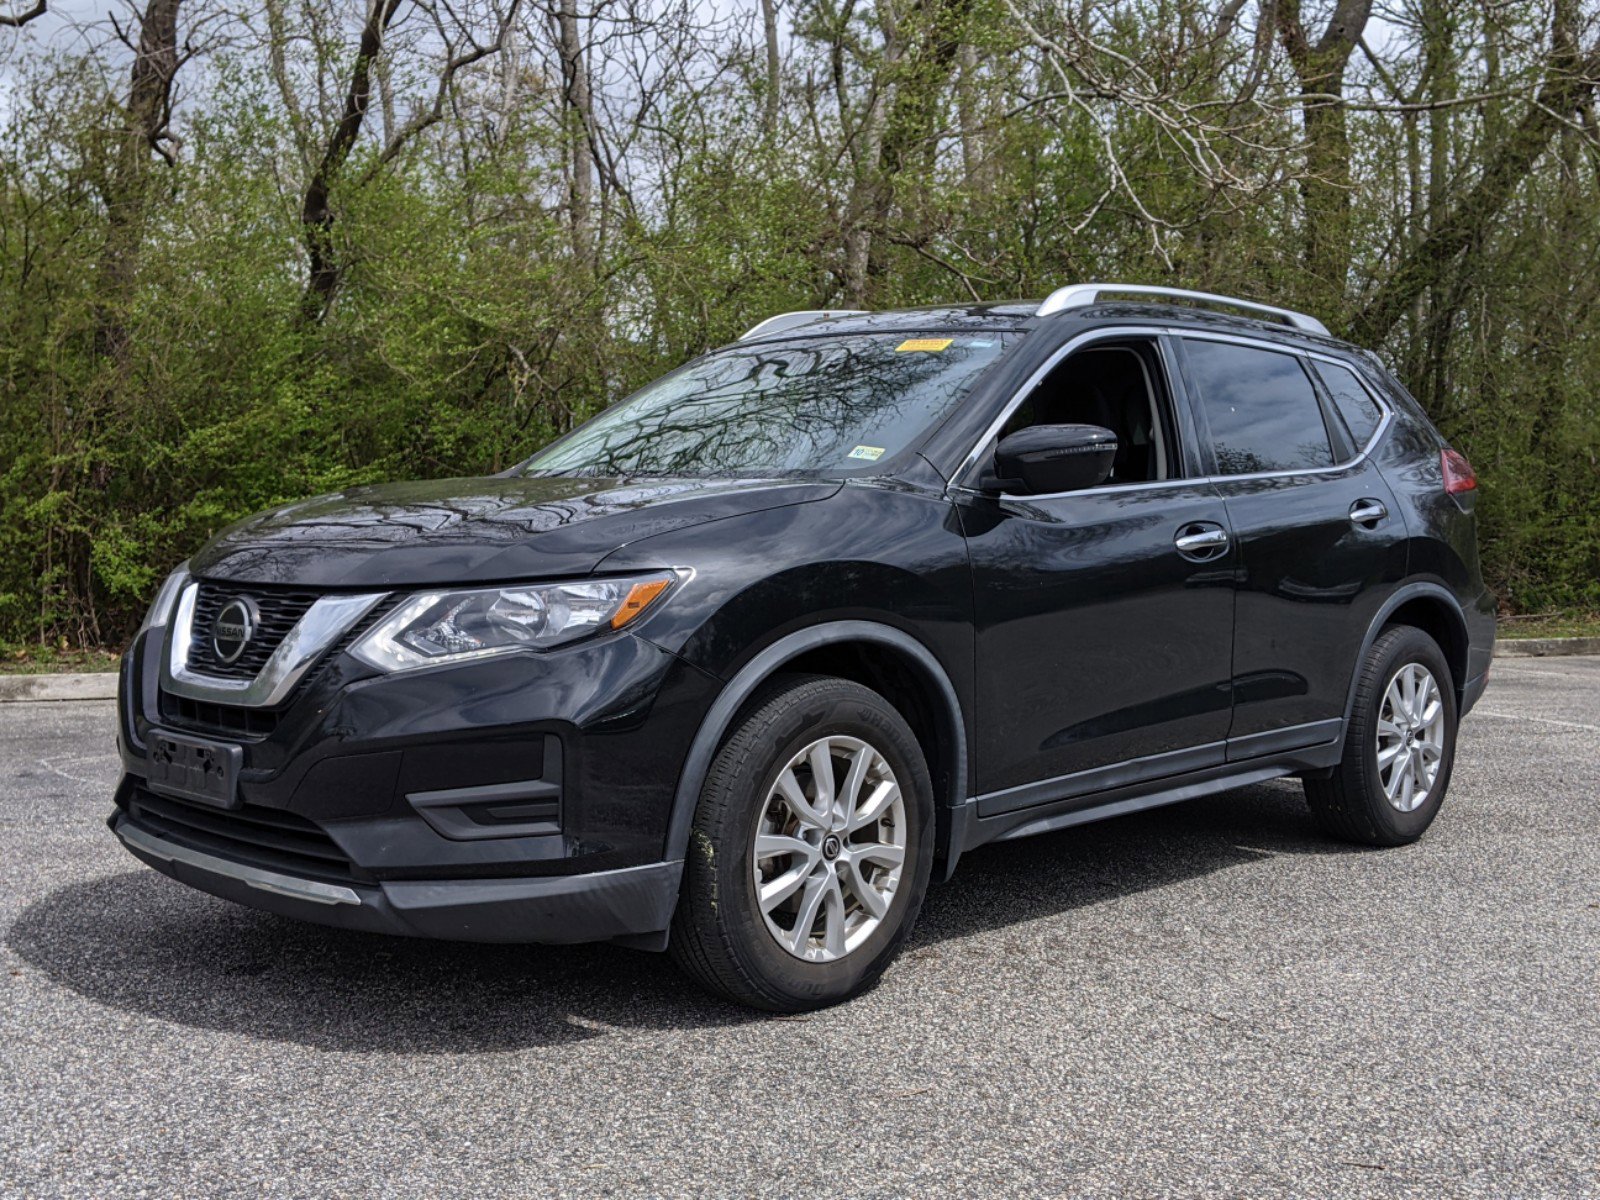 Pre-Owned 2018 Nissan Rogue SV Sport Utility in Hampton #22NW1580A |  Mercedes-Benz of Hampton